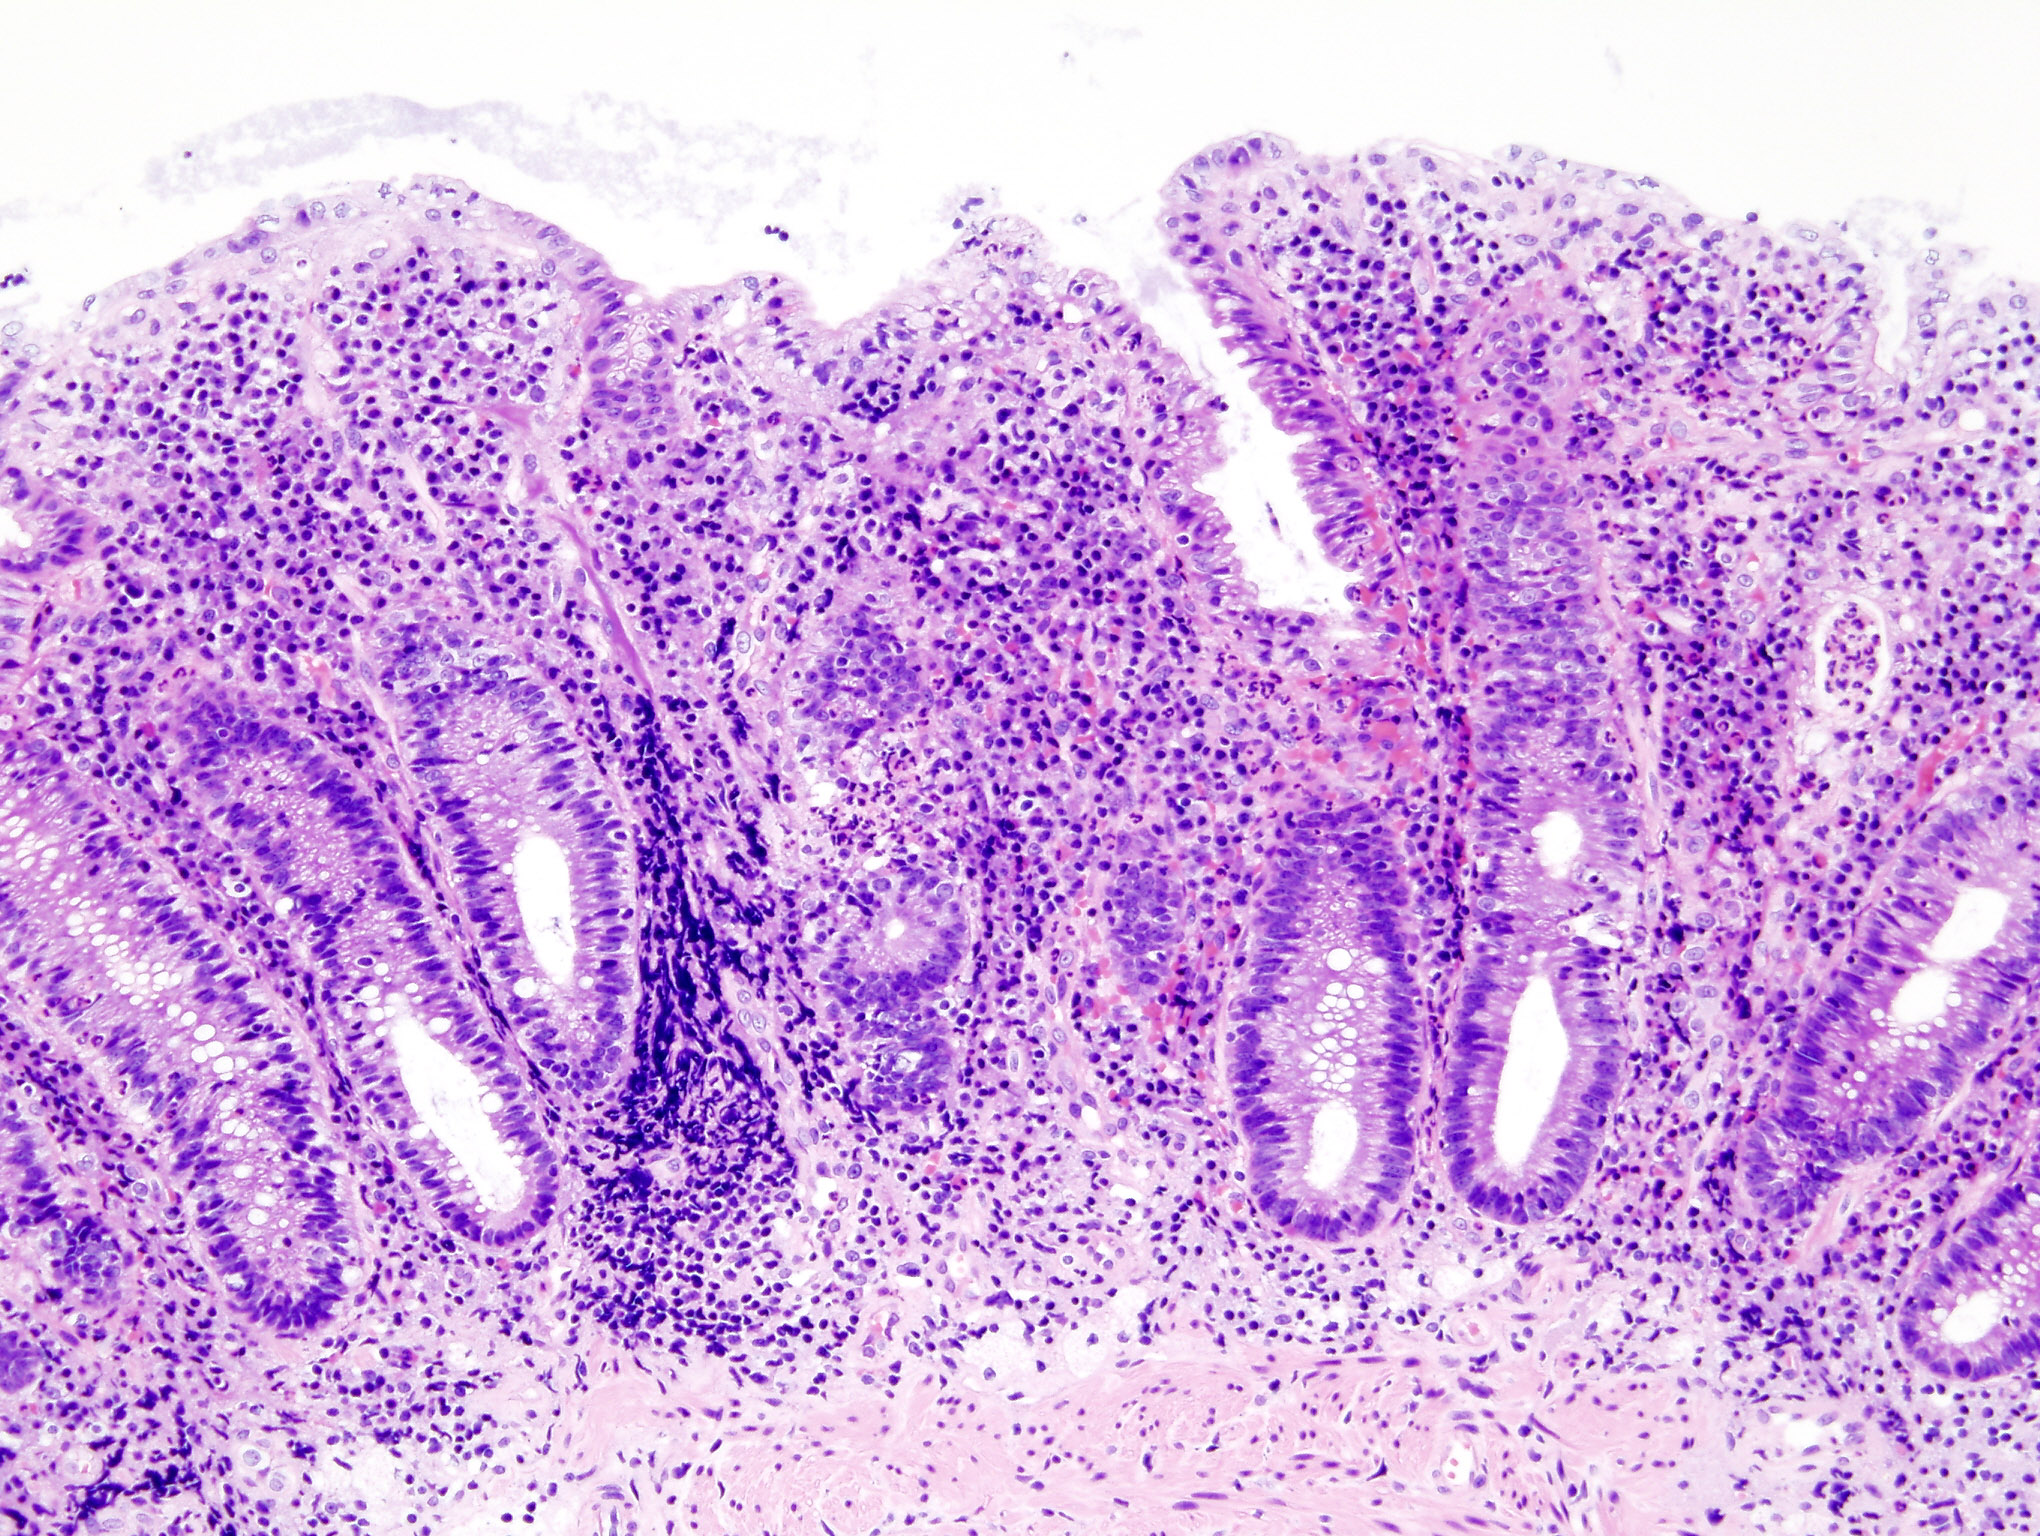 Ulcerative colitis. H&E stain showing marked lymphocytic infiltration (blue/purple) of the intestinal mucosa and distortion of the architecture of the crypts. [18]